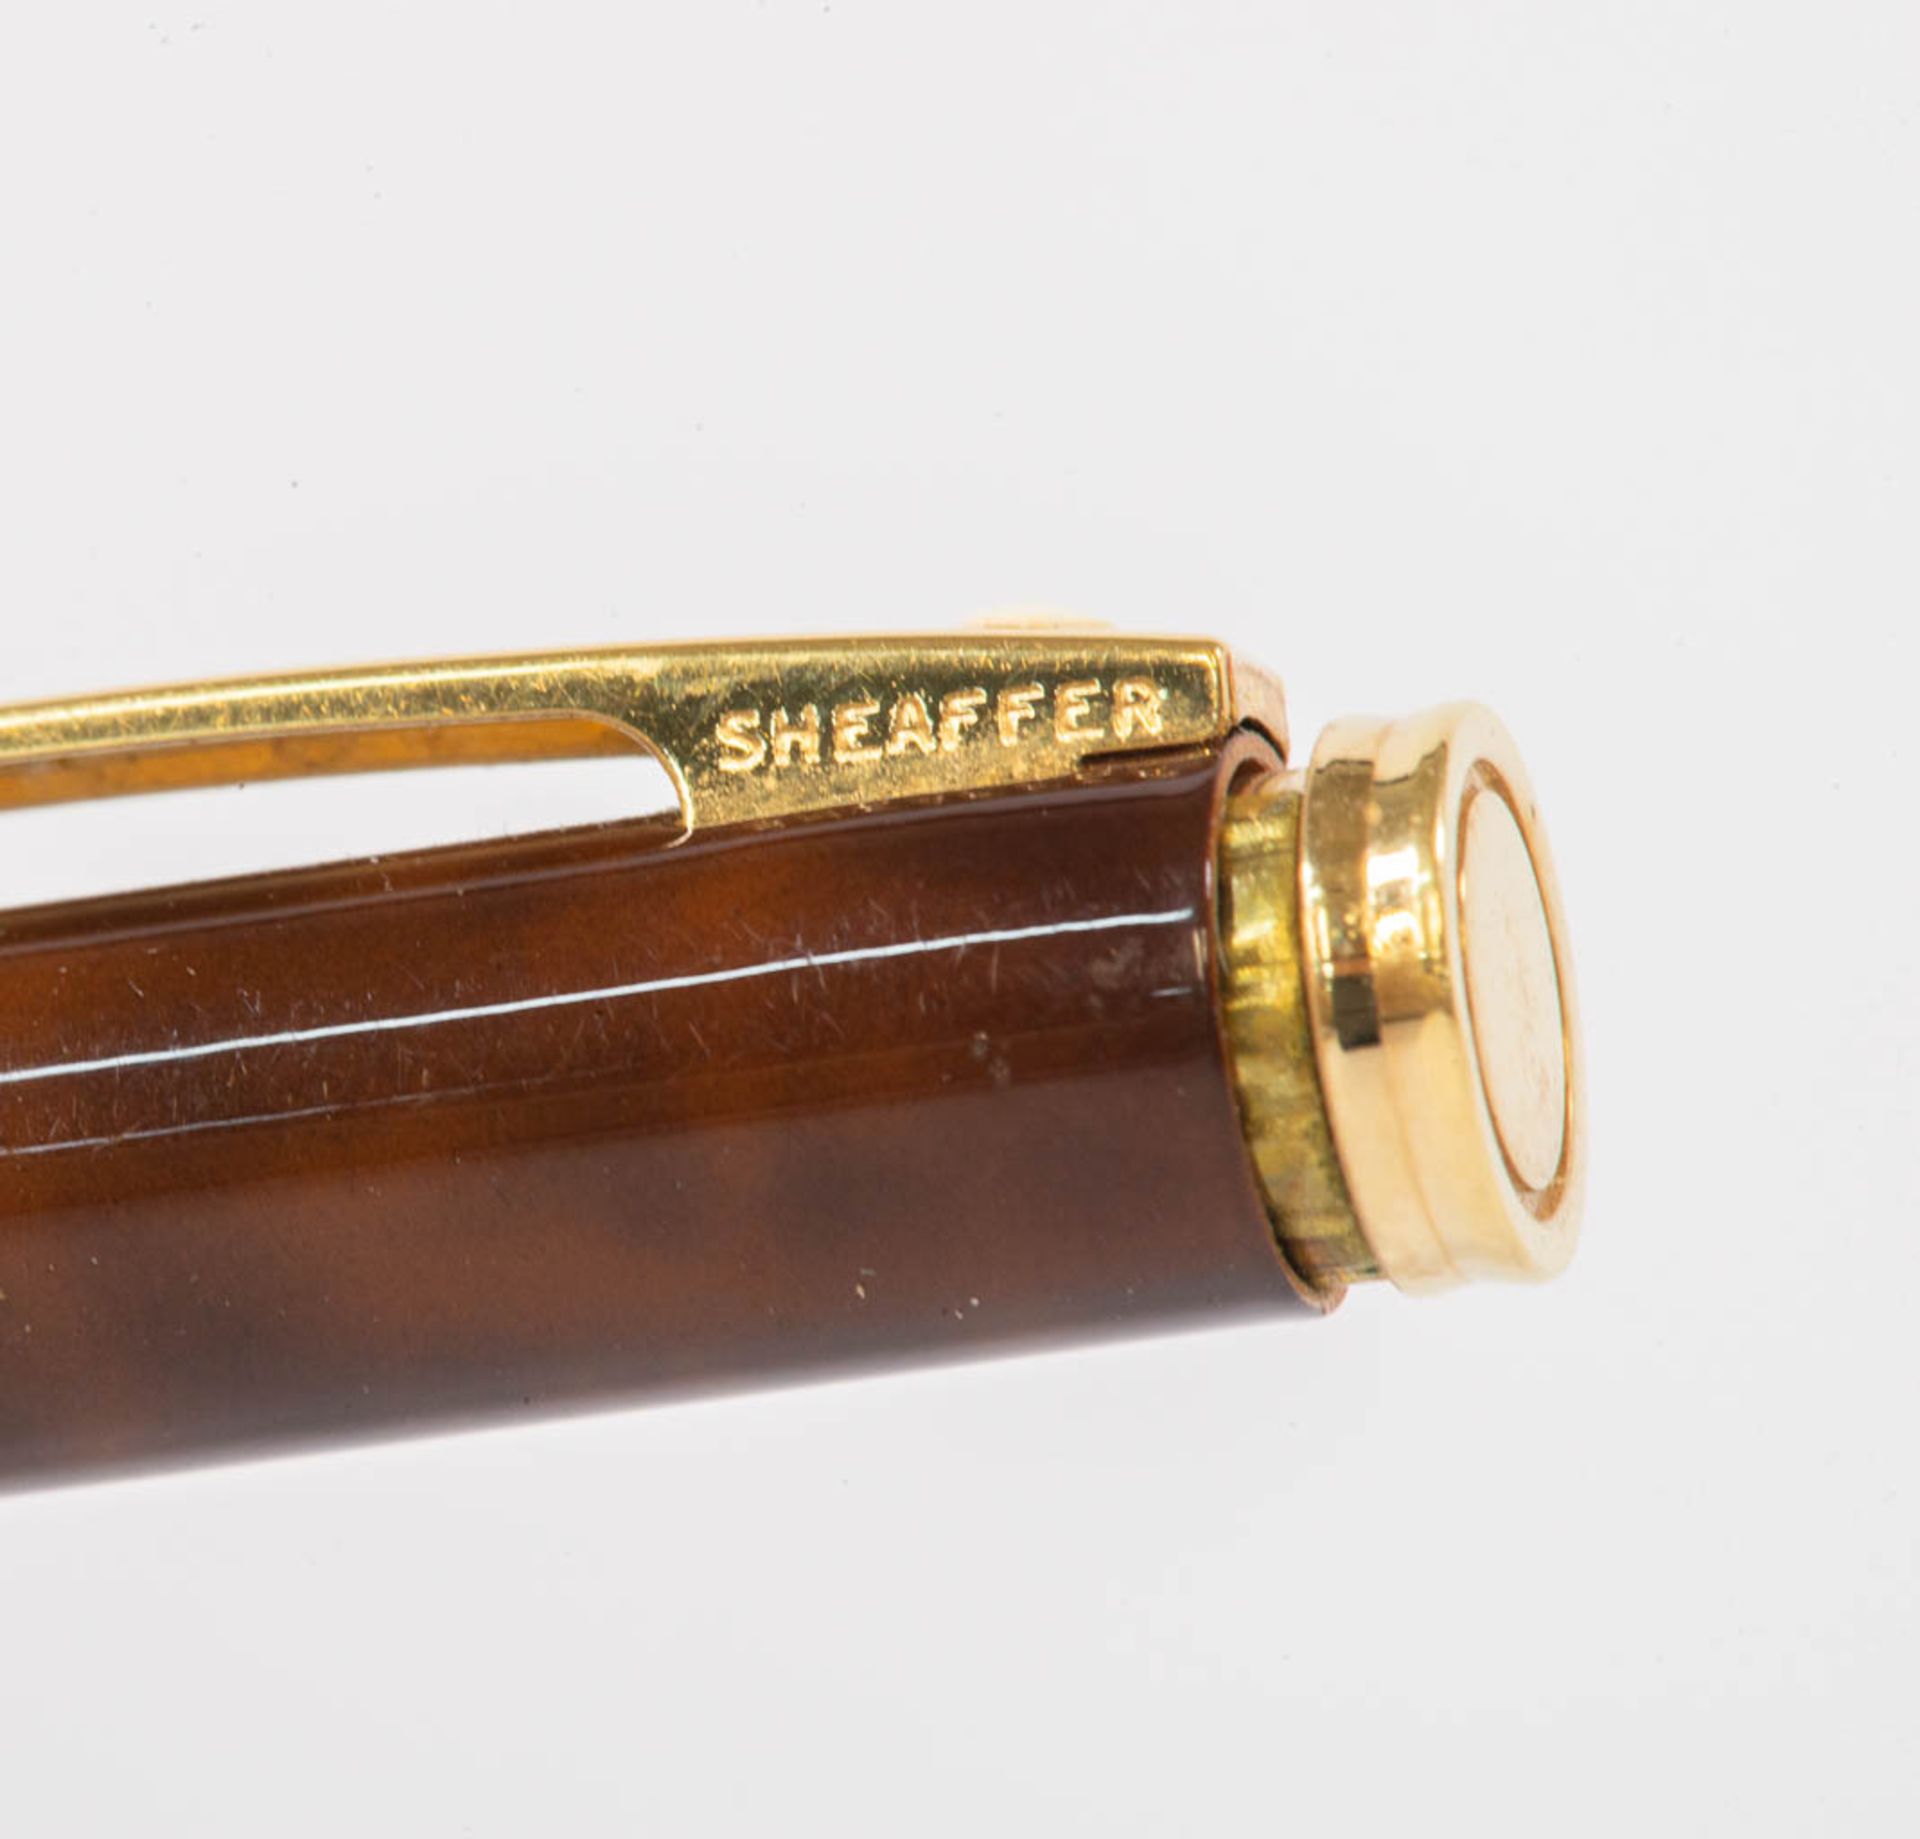 A Sheaffer fountain pen with 18kg gold nib, and a ballpoint pen in their original case. - Image 6 of 11